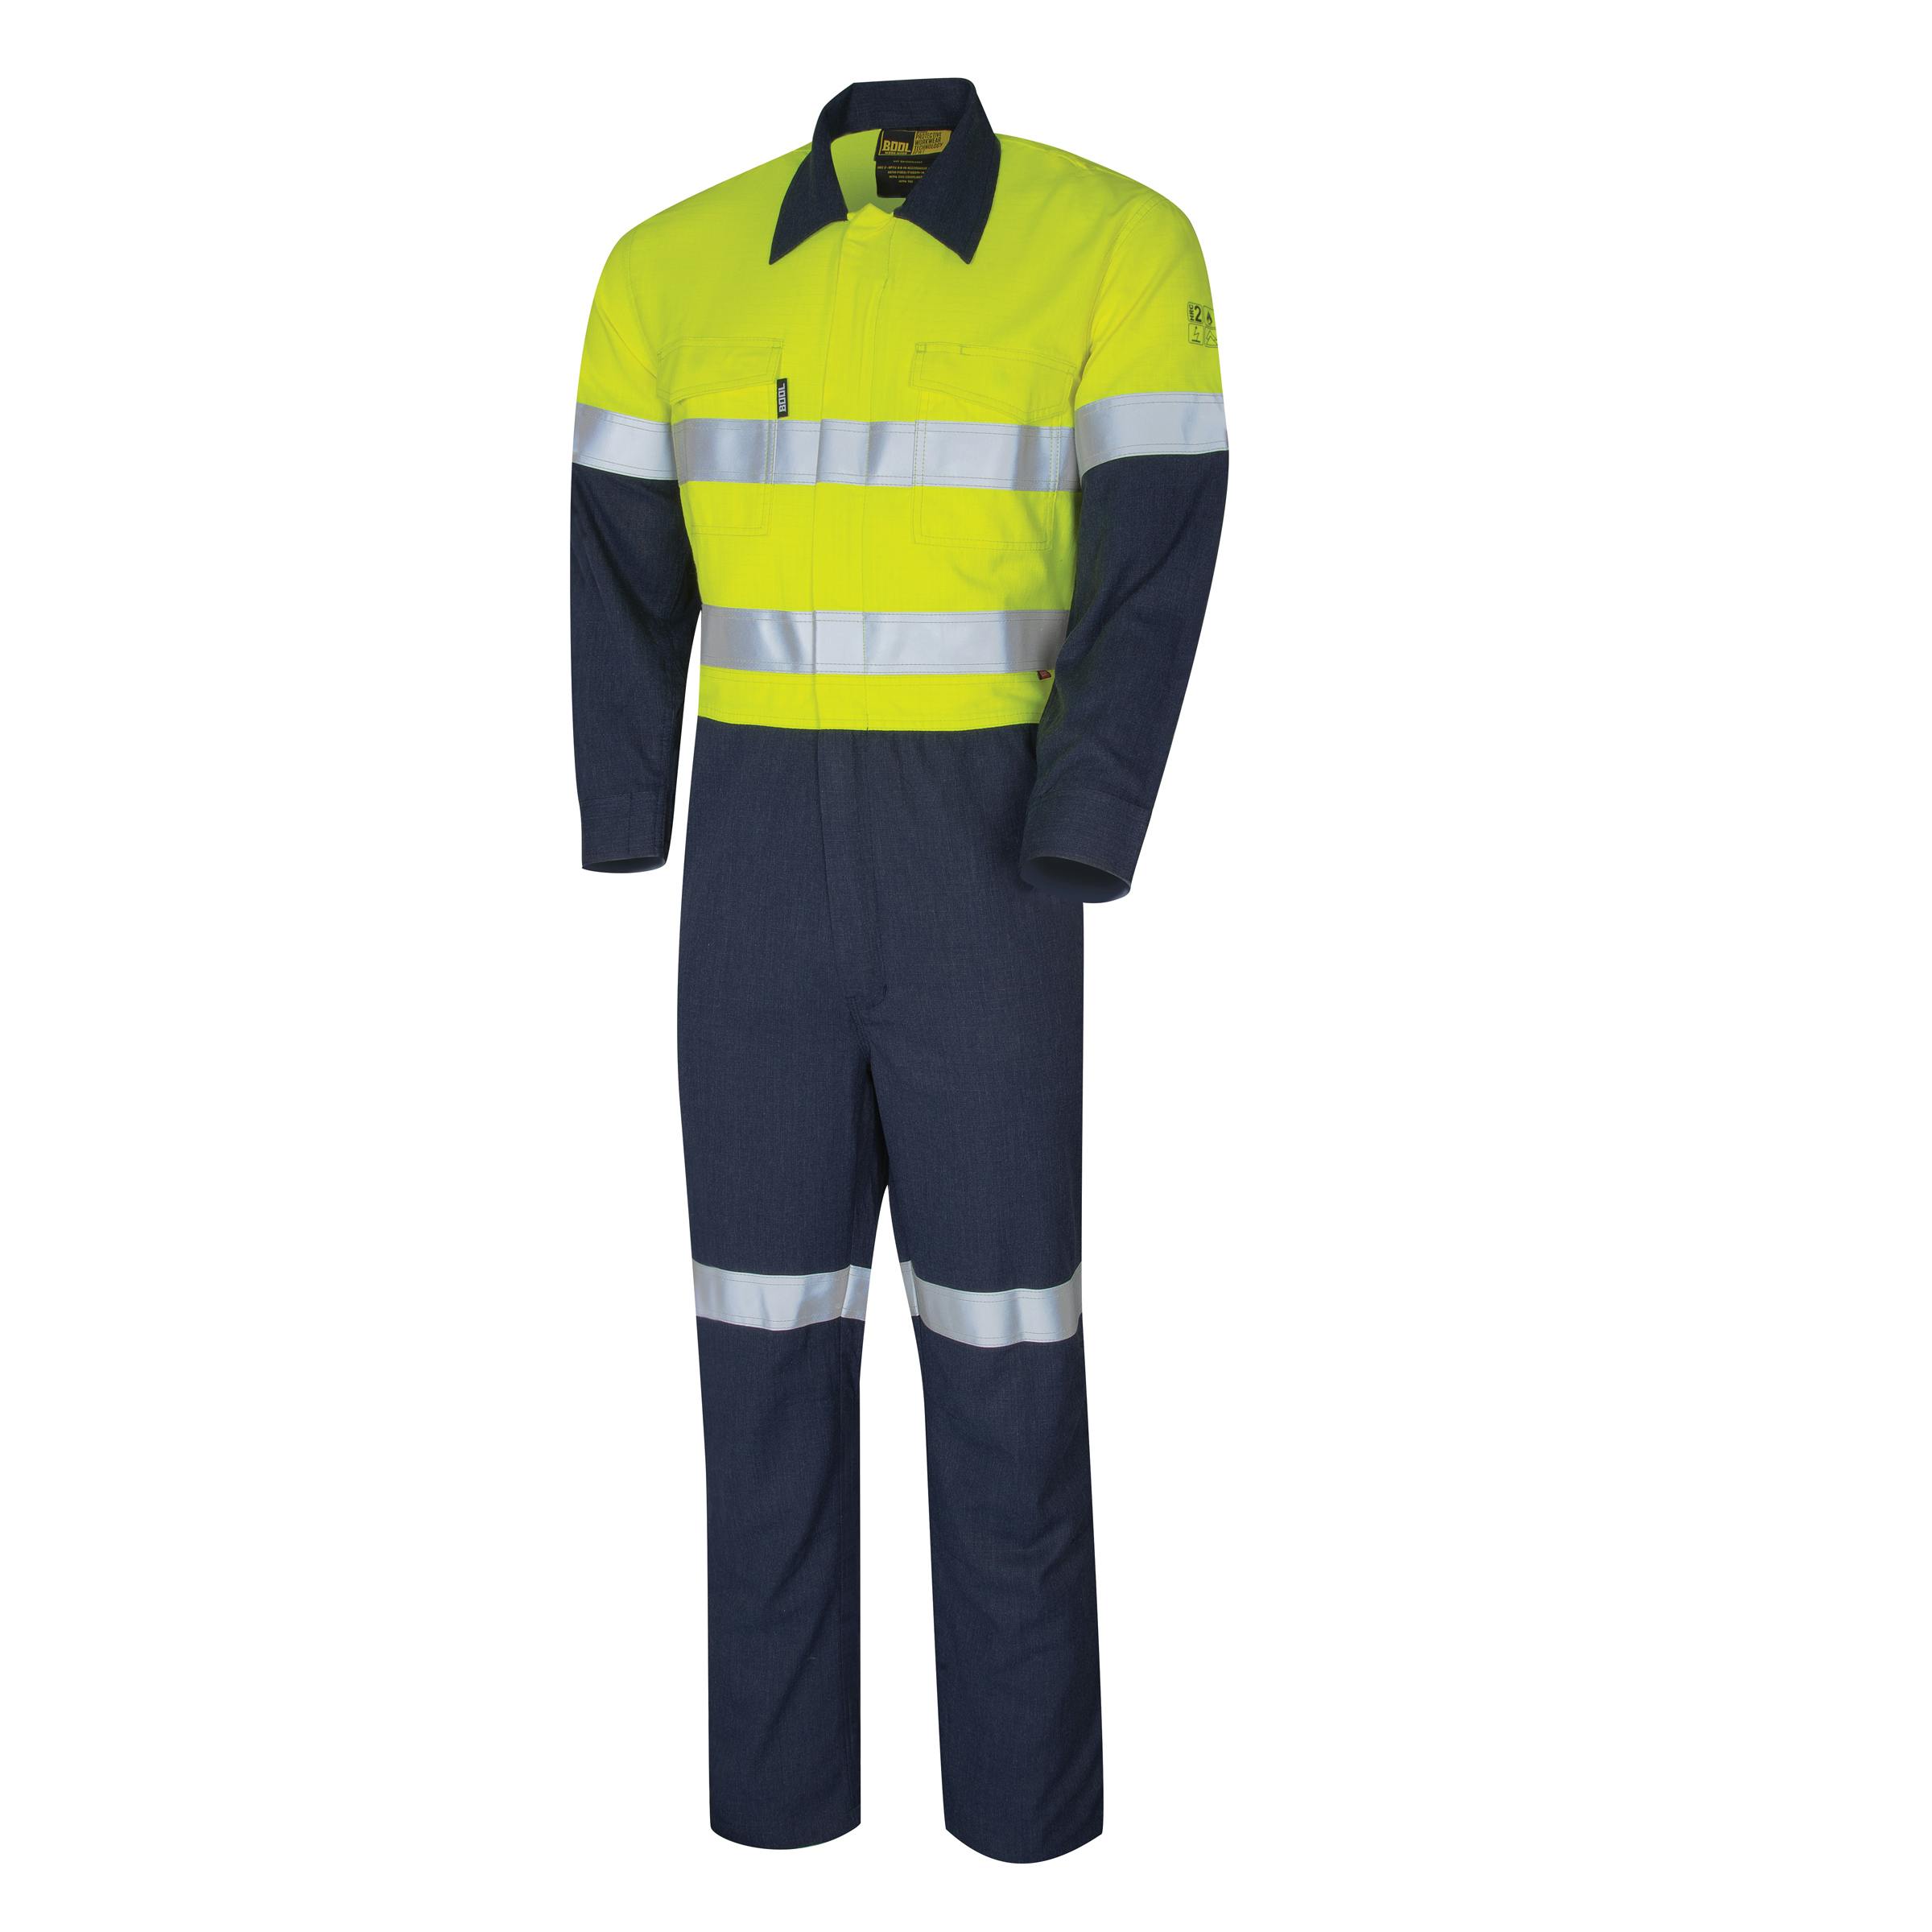 Bool PT Coveralls 197gsm Parvotex 2.0 Fire Retardent With Loxy FR 9801 Two Hoop Reflective Tape